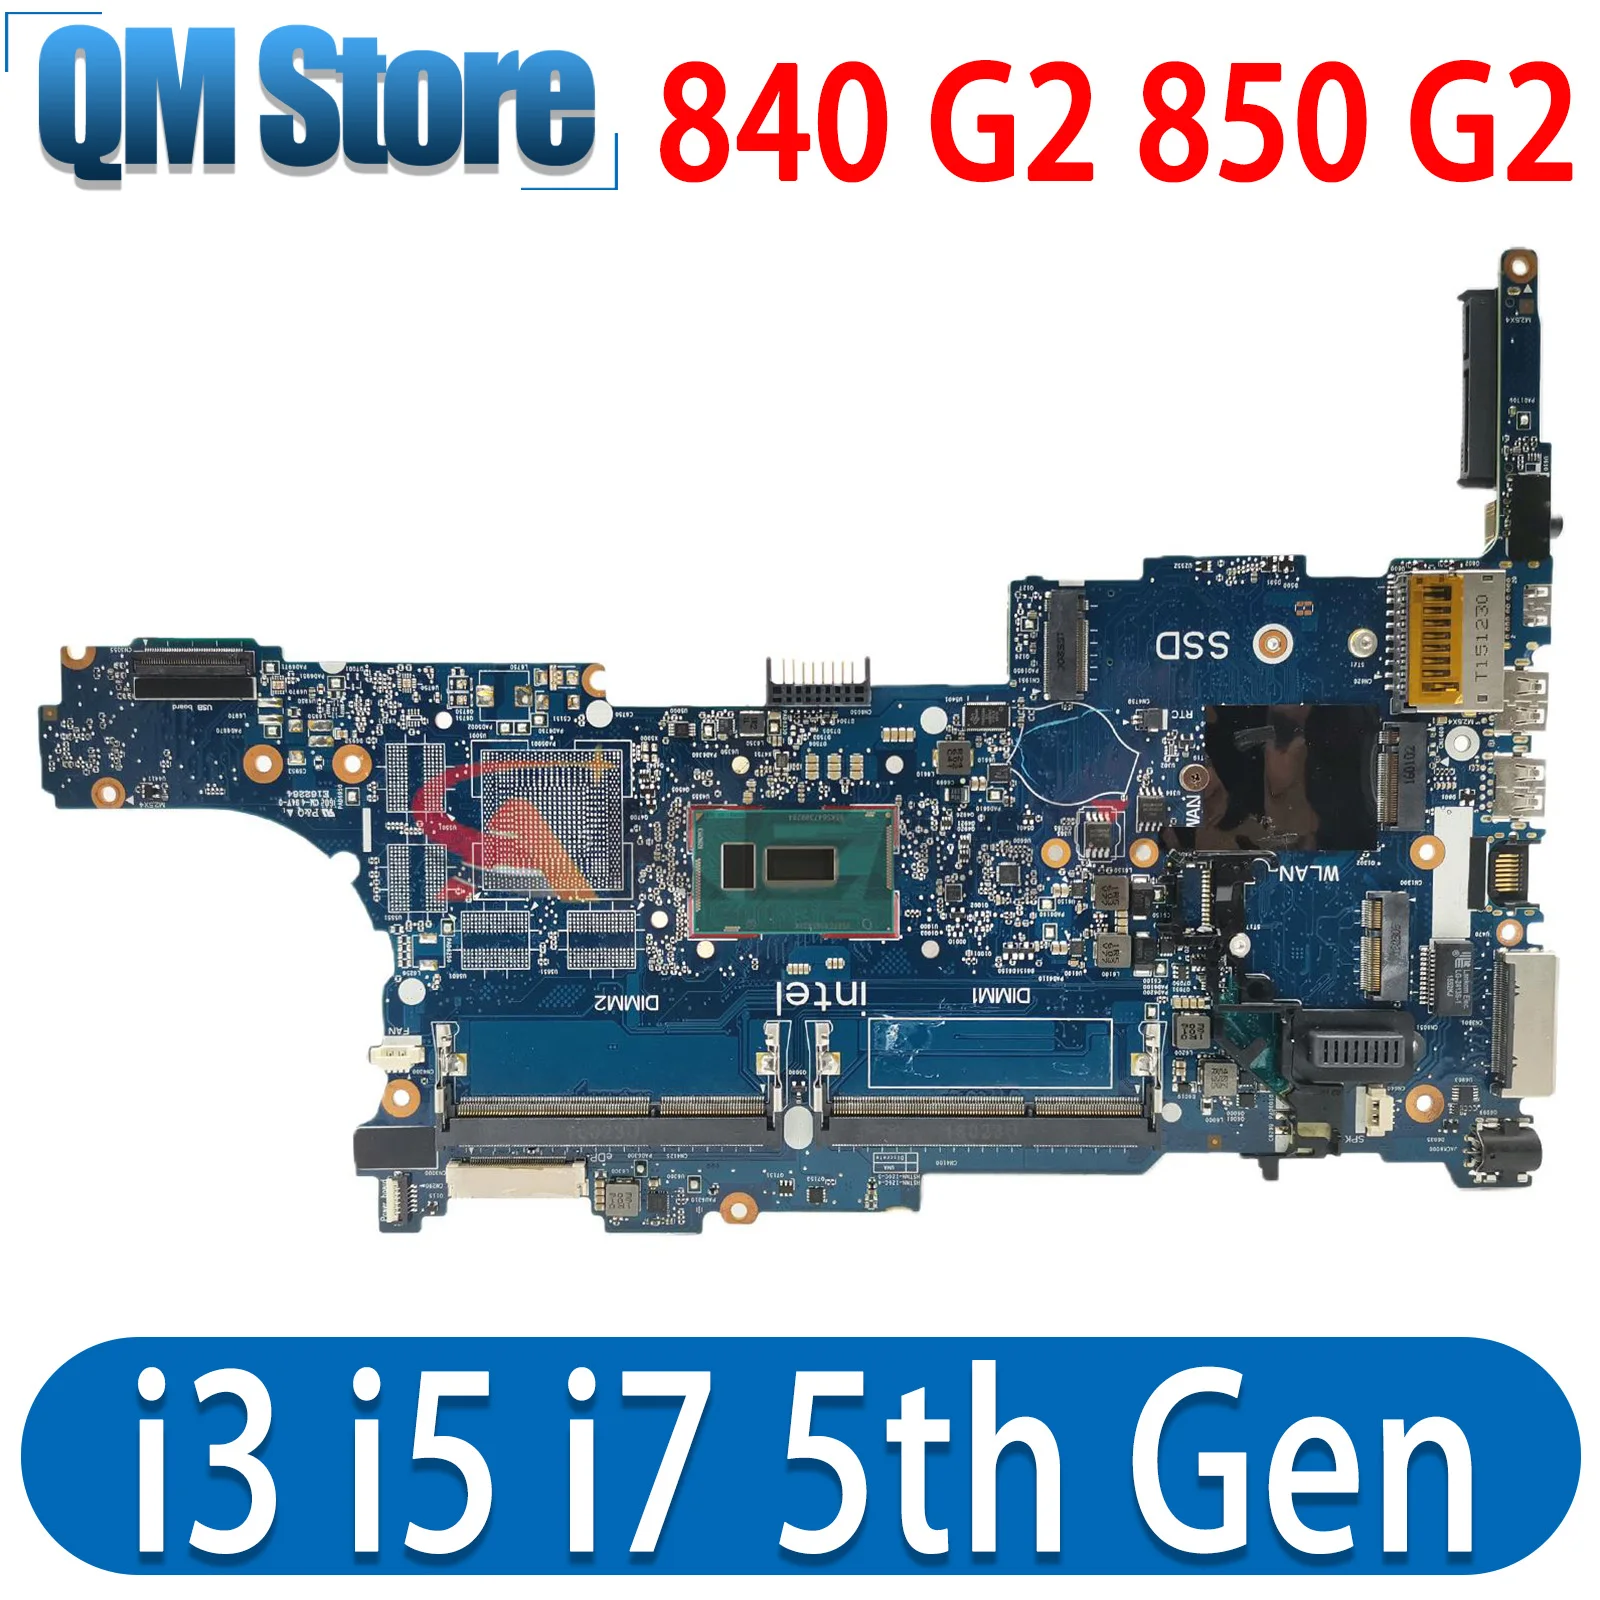 

For HP Elitebook 840 G2 850 G2 Laptop motherboard Mainboard with I3 I5 I7 5th Gen CPU 6050A2637901 Motherboard TESTED DDR3